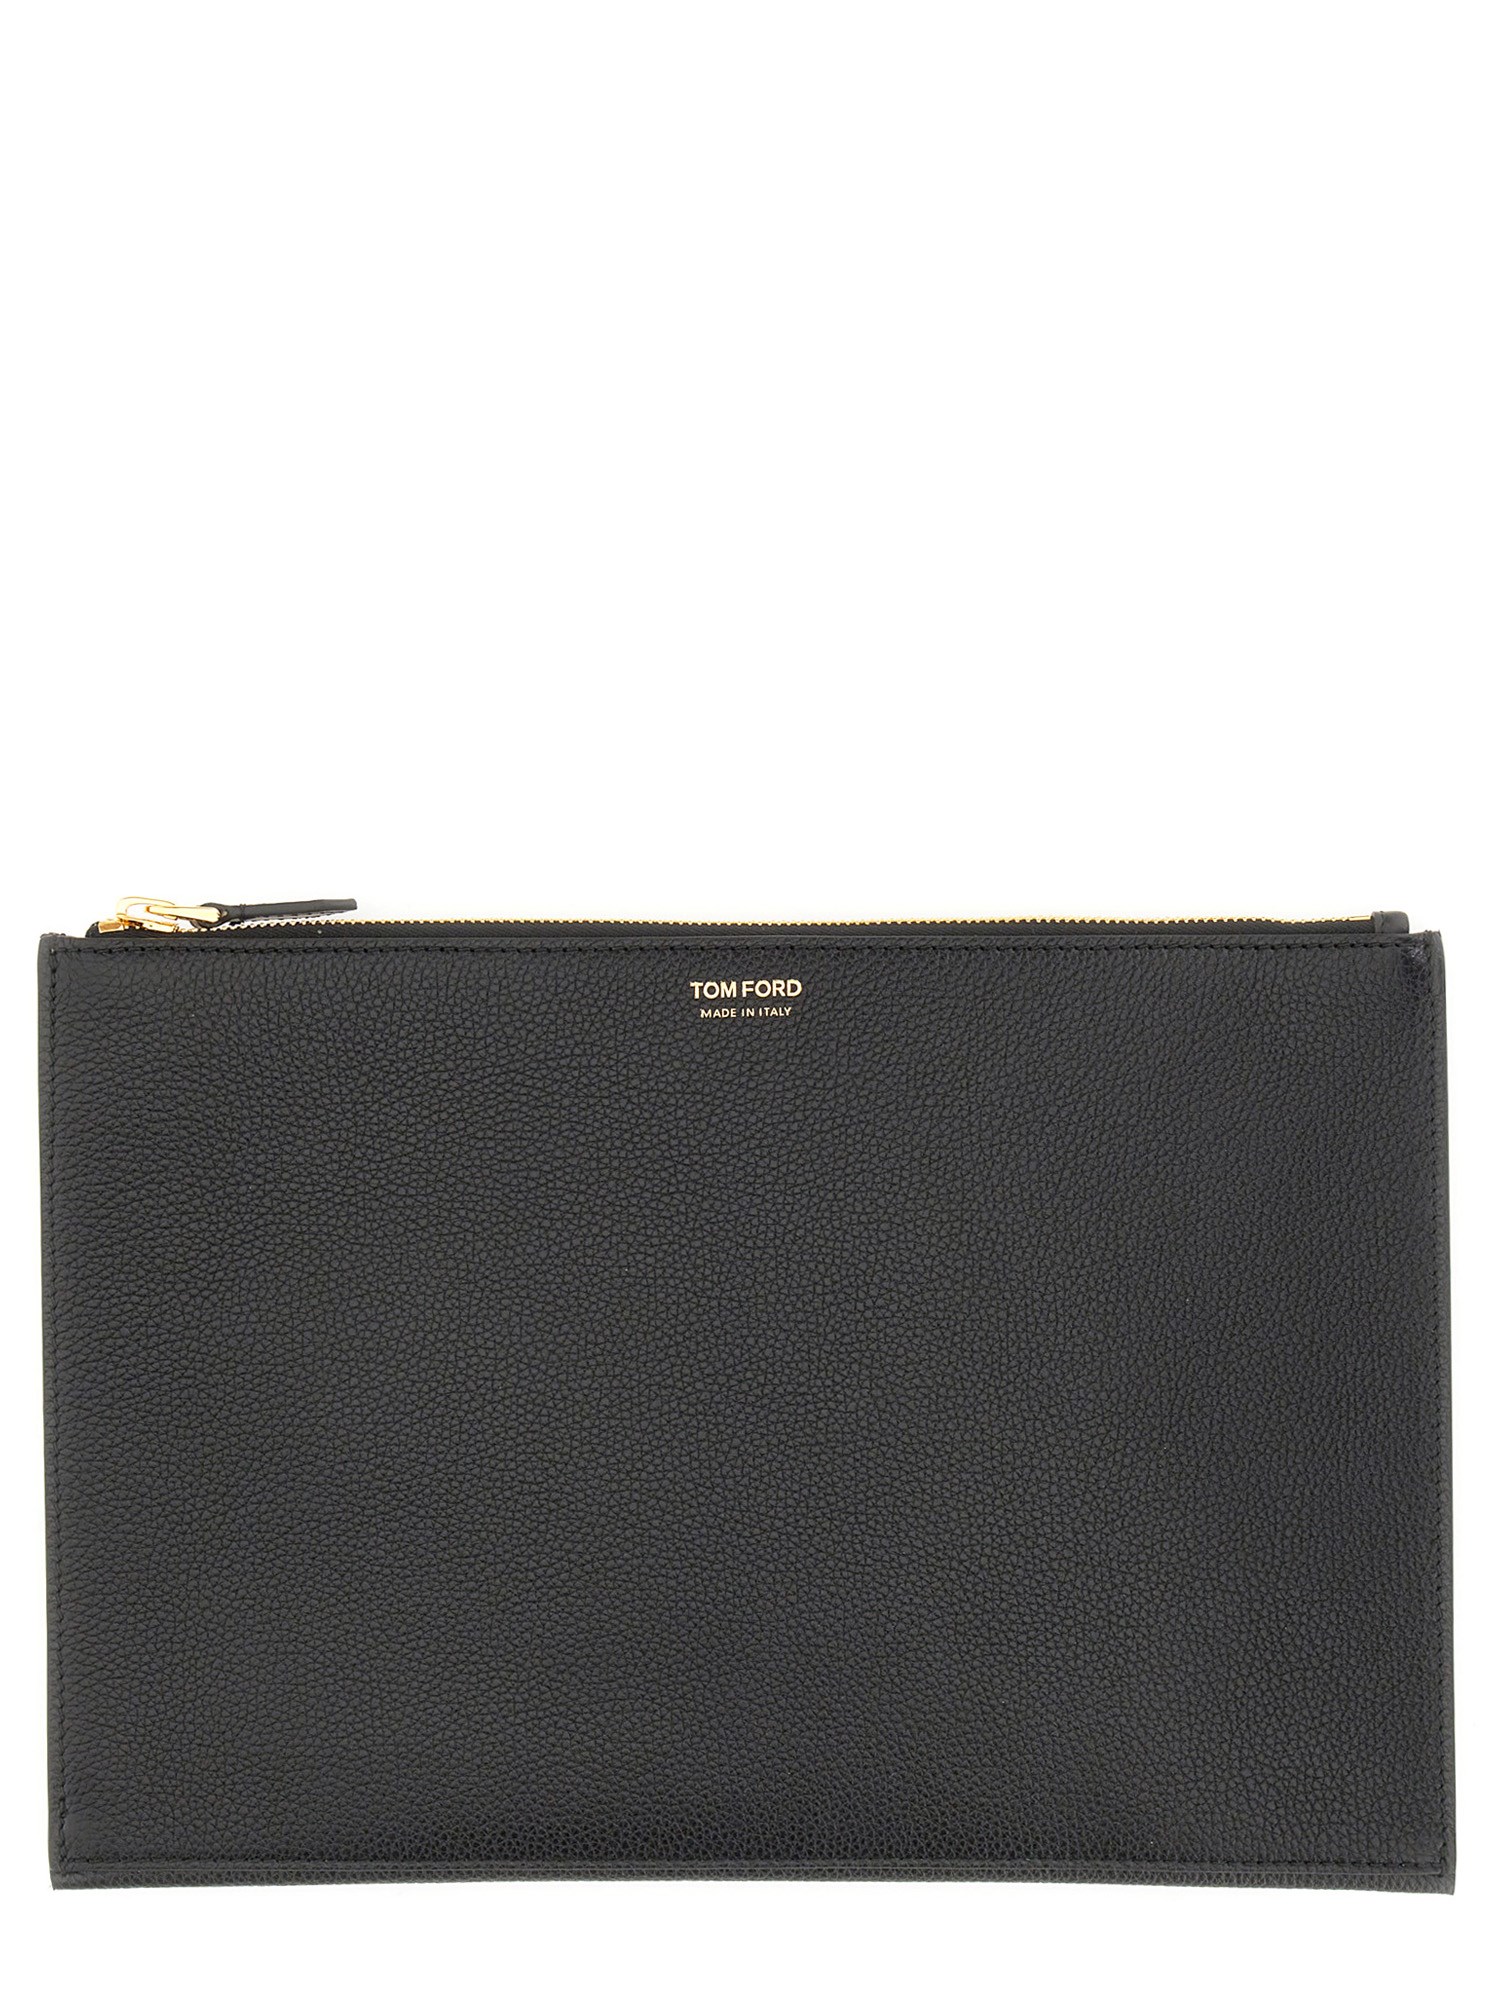 tom ford flat leather pouch